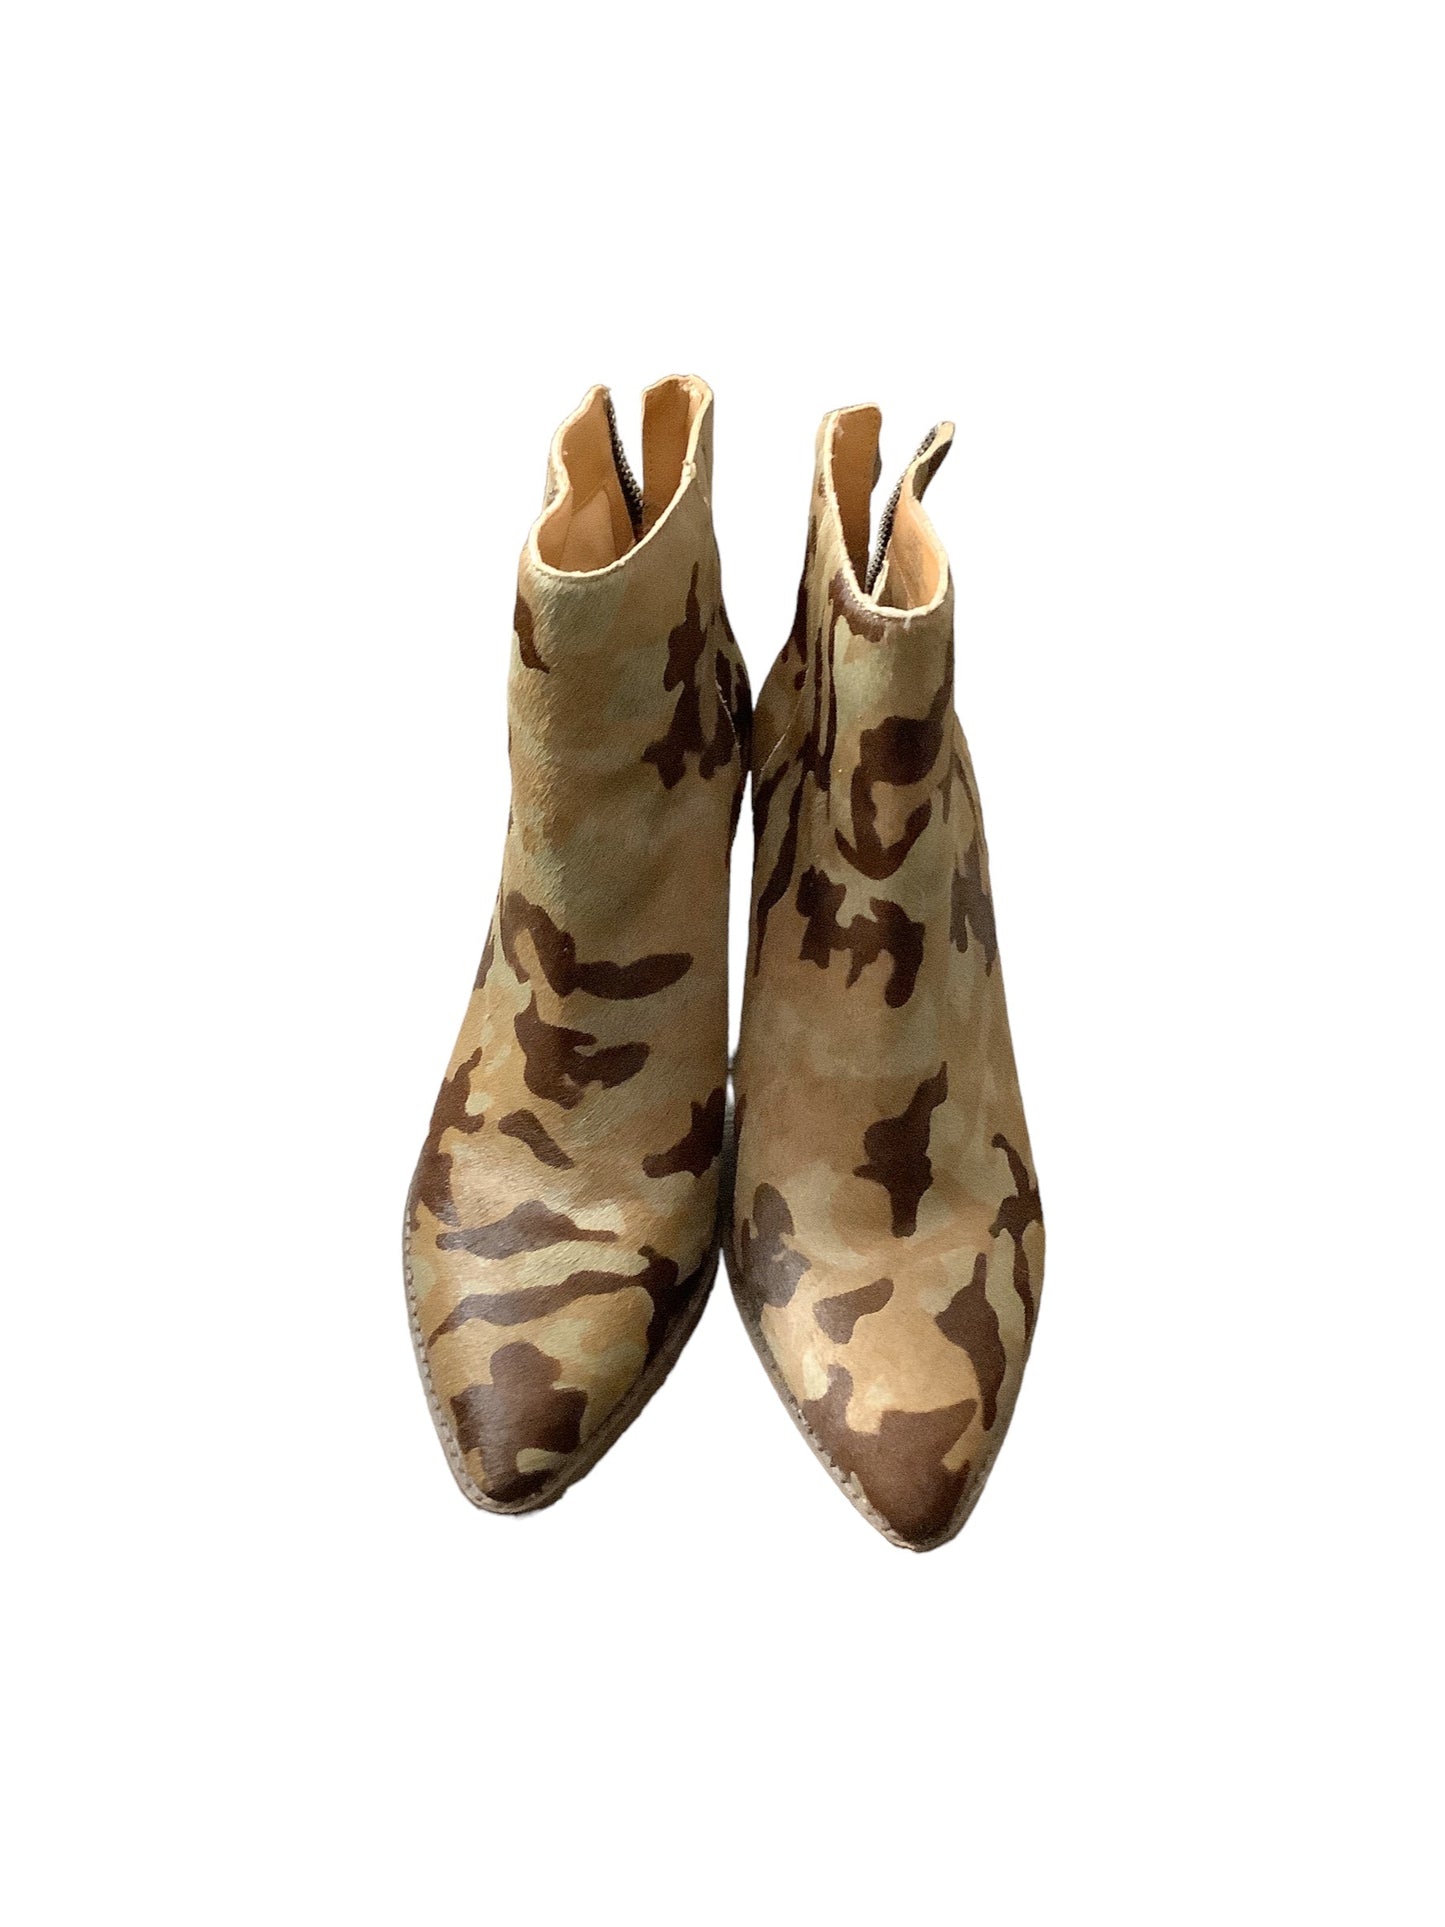 Camouflage Print Boots Ankle Heels Lucky Brand, Size 8.5